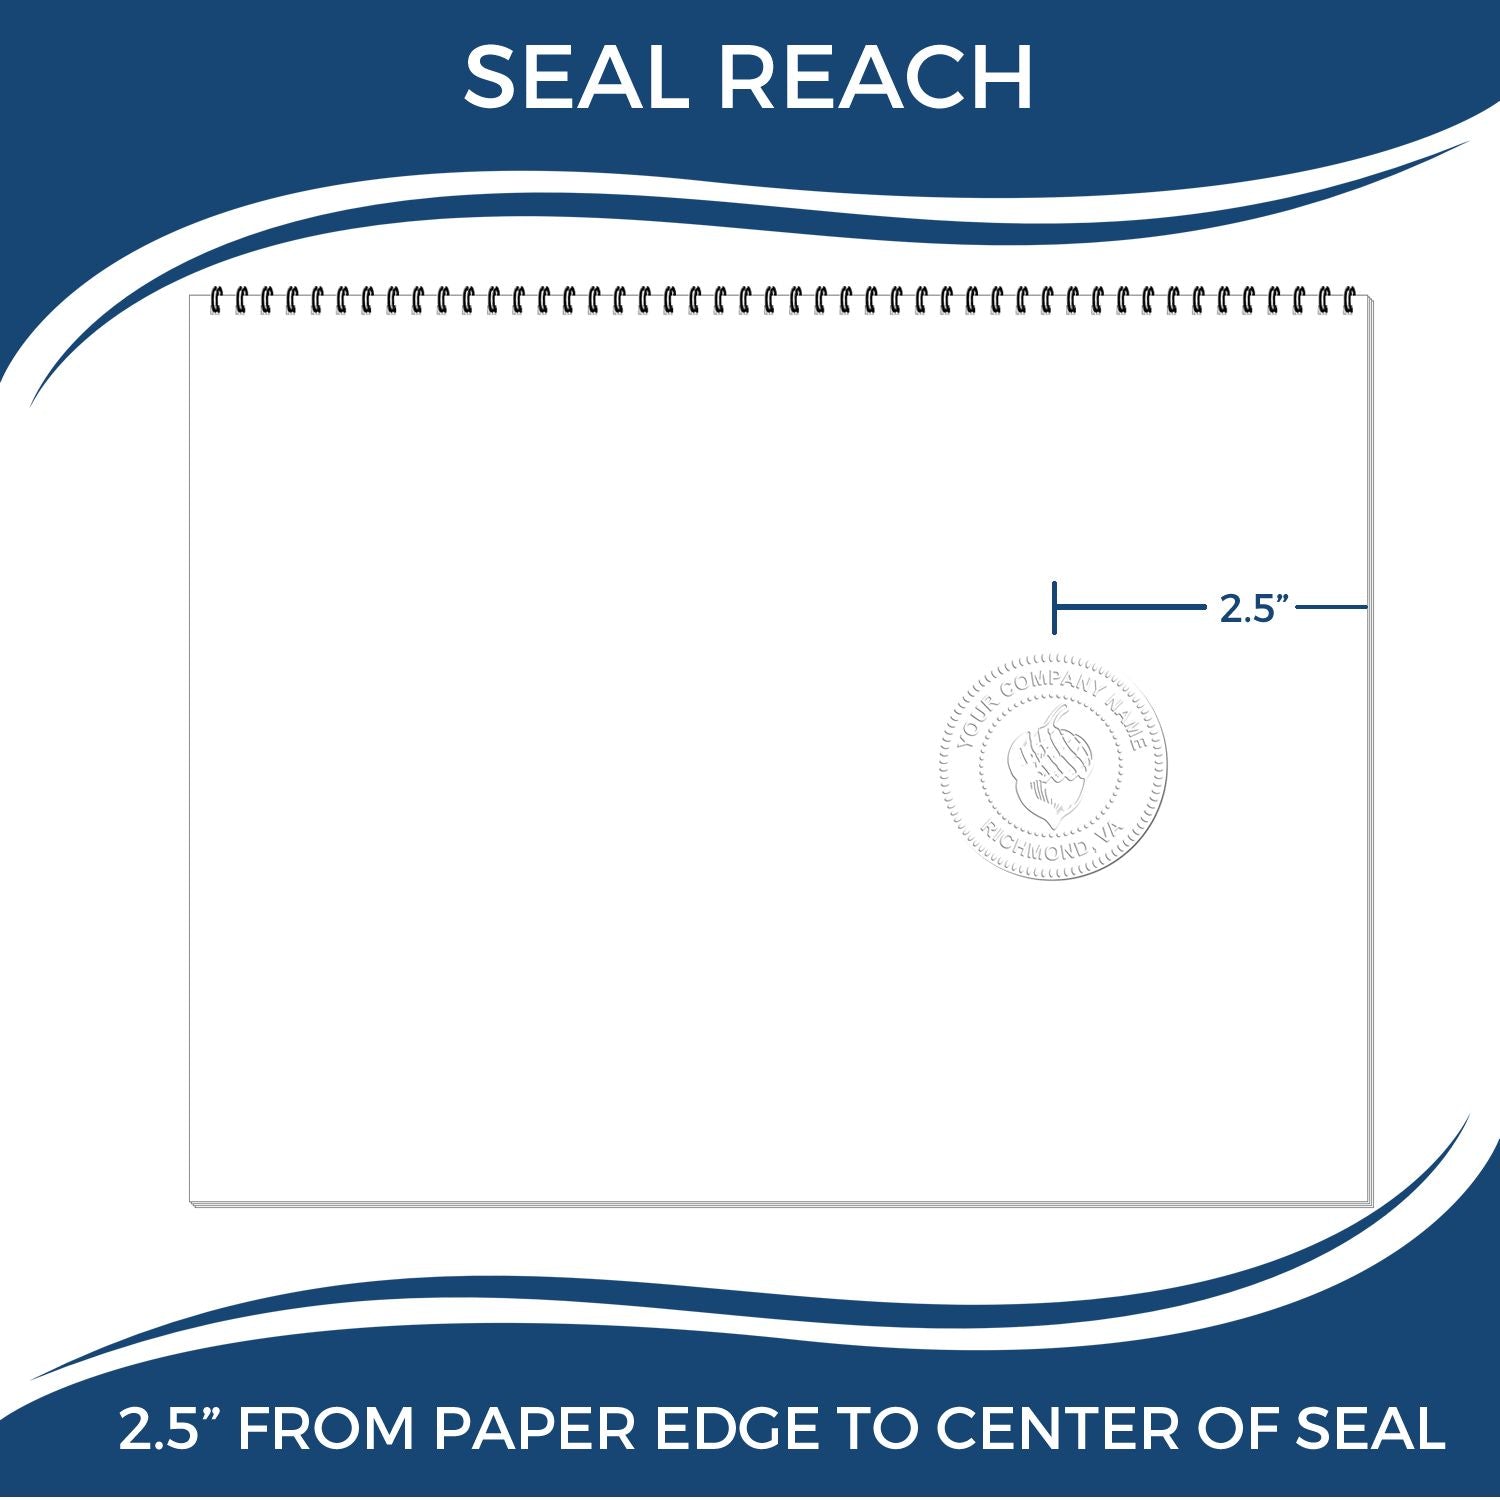 An infographic showing the seal reach which is represented by a ruler and a miniature seal image of the Long Reach Florida Land Surveyor Seal